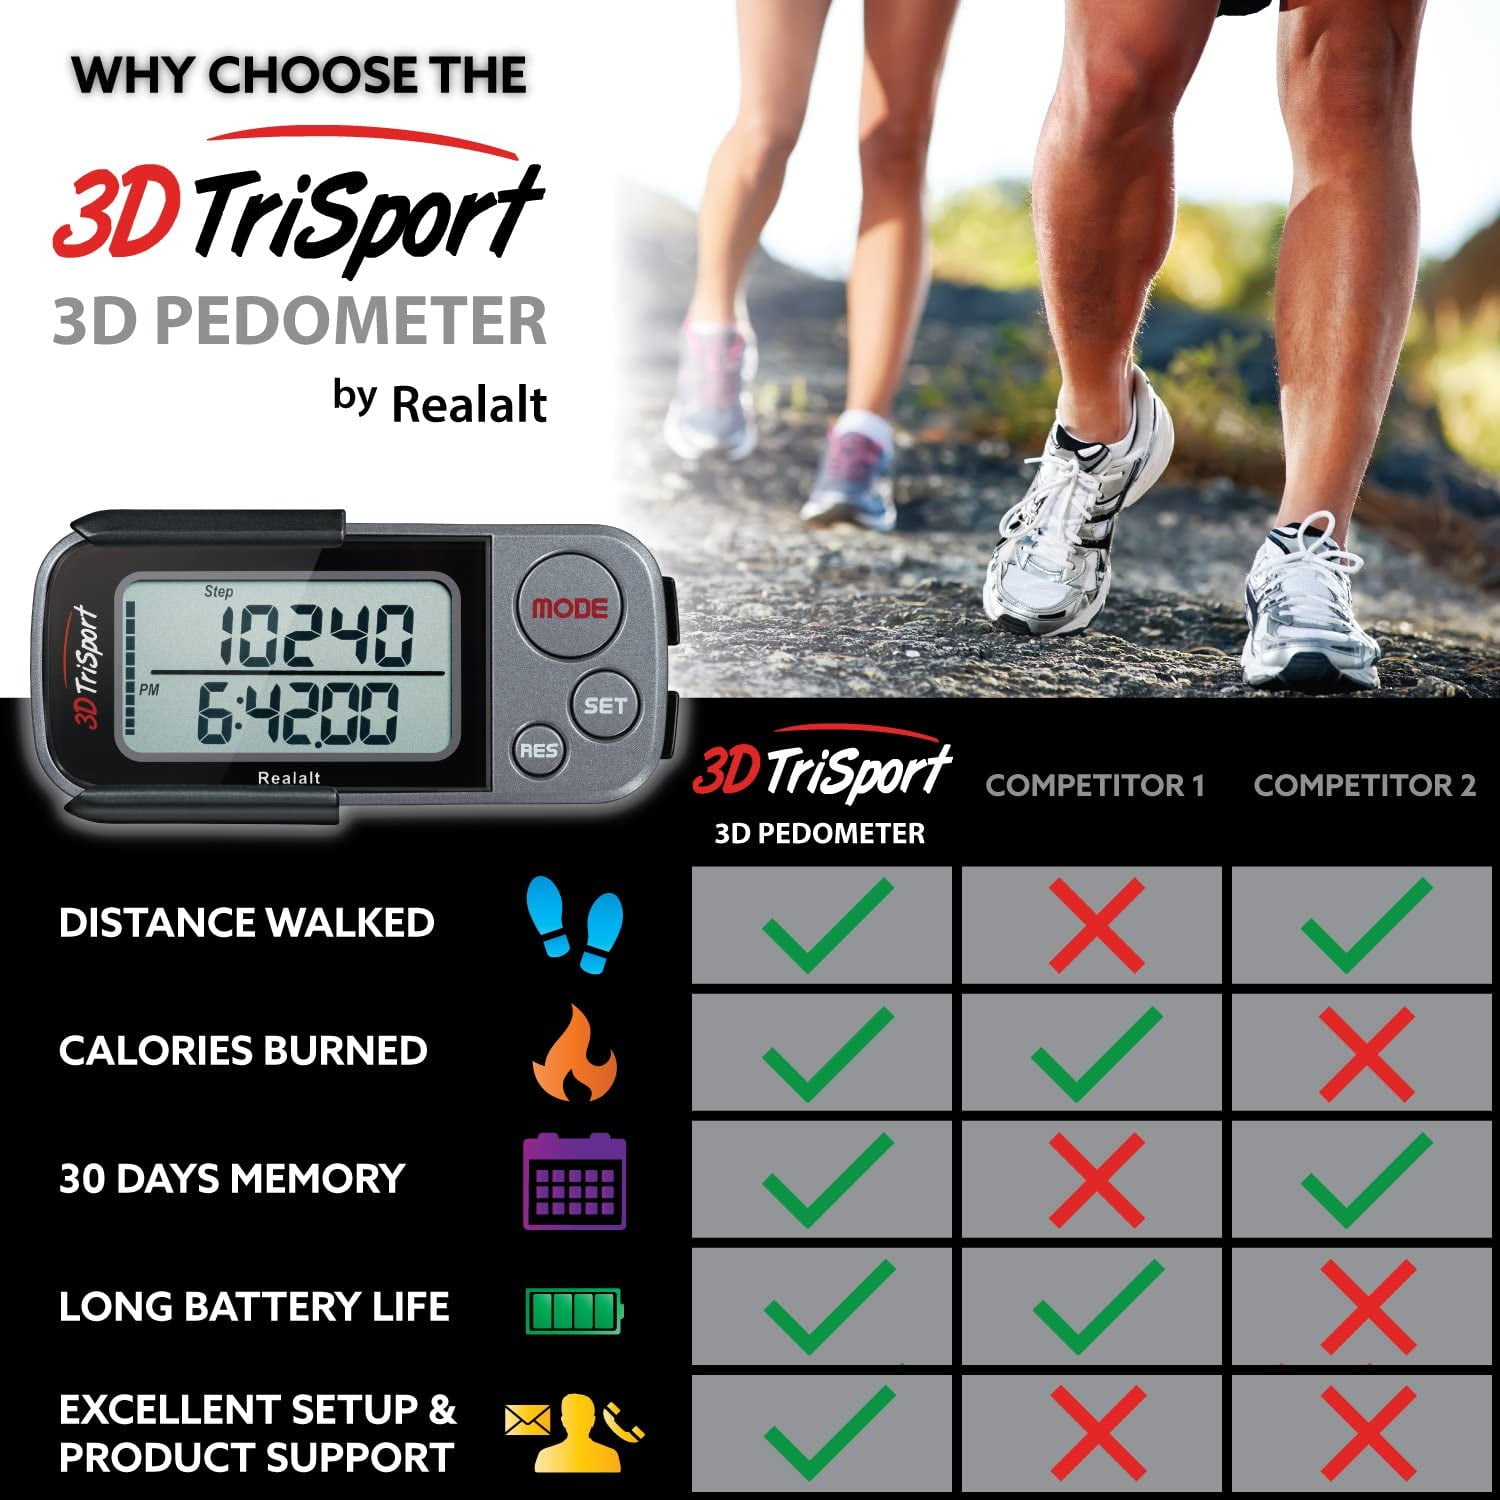 Calorie Counter Exercise Time 30 Days Memory Free eBook Accurate Step Counter Exercise Time Walking Distance Miles/Km Daily Target Monitor Stealth Black RR-12-14-4 Realalt 3DTriSport Walking 3D Pedometer with Clip and Strap